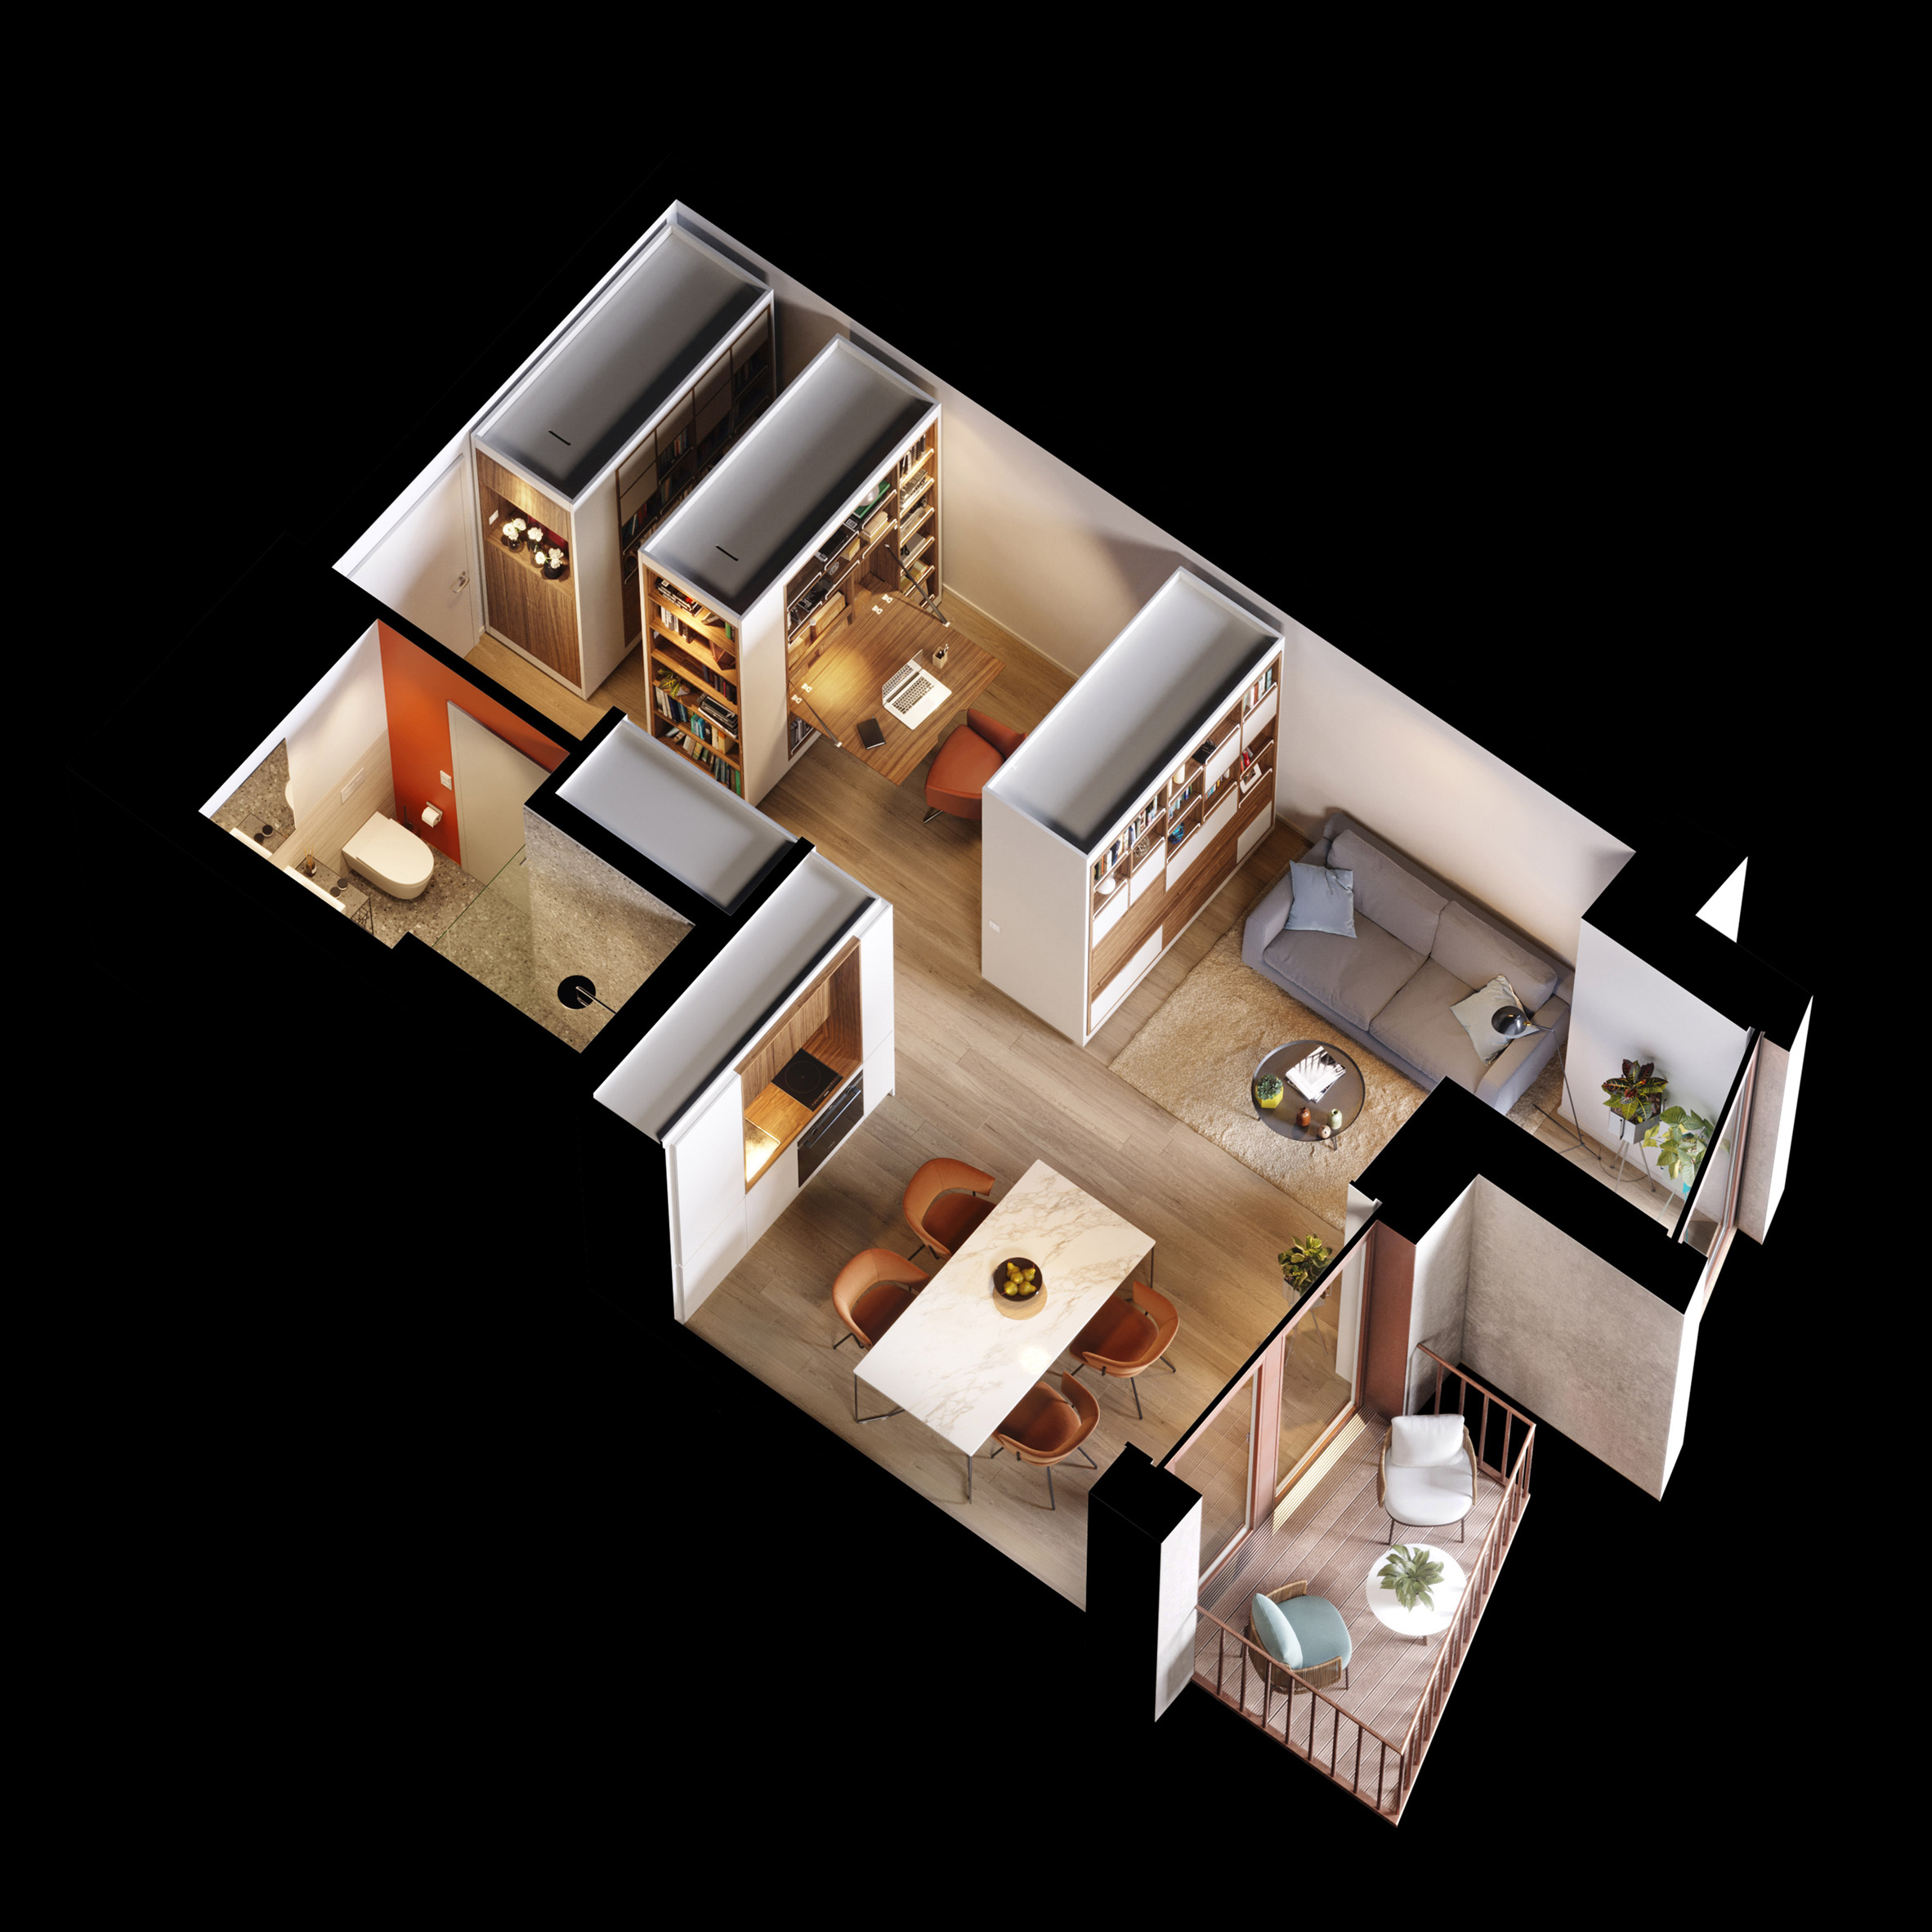 Axonometric drawing of an apartment by UNStudio